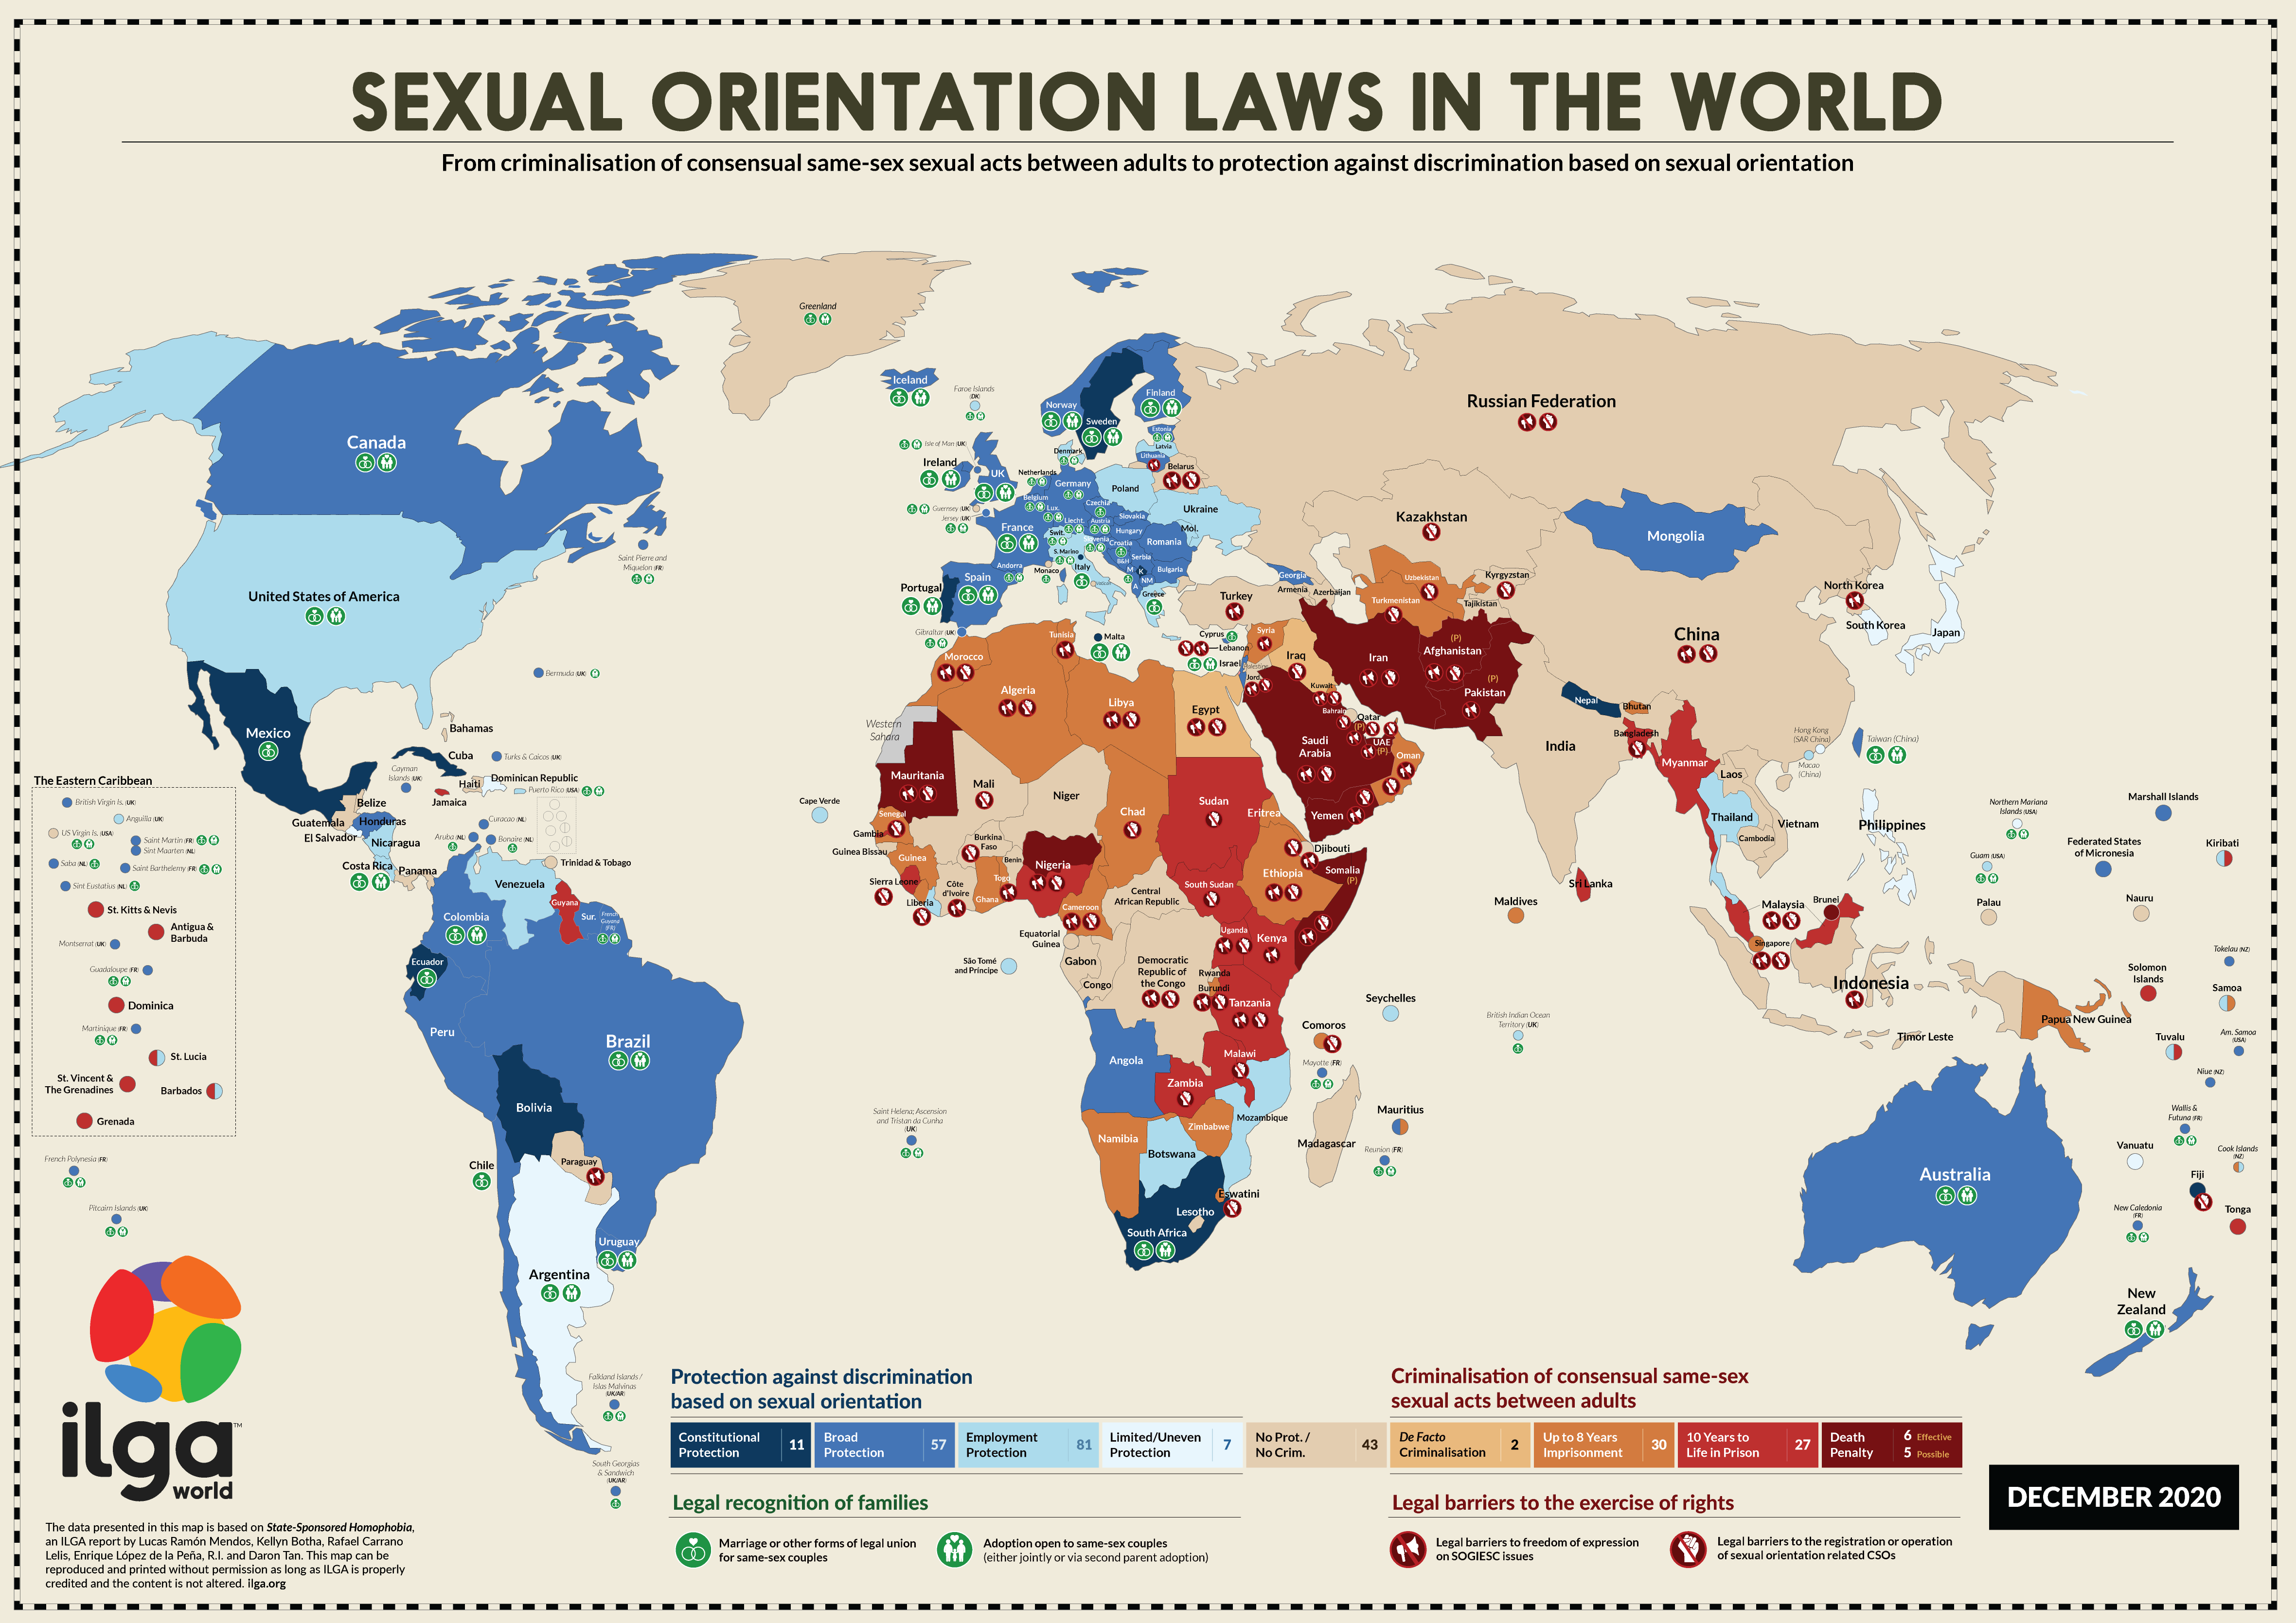 World map of sexual orientation laws around the world